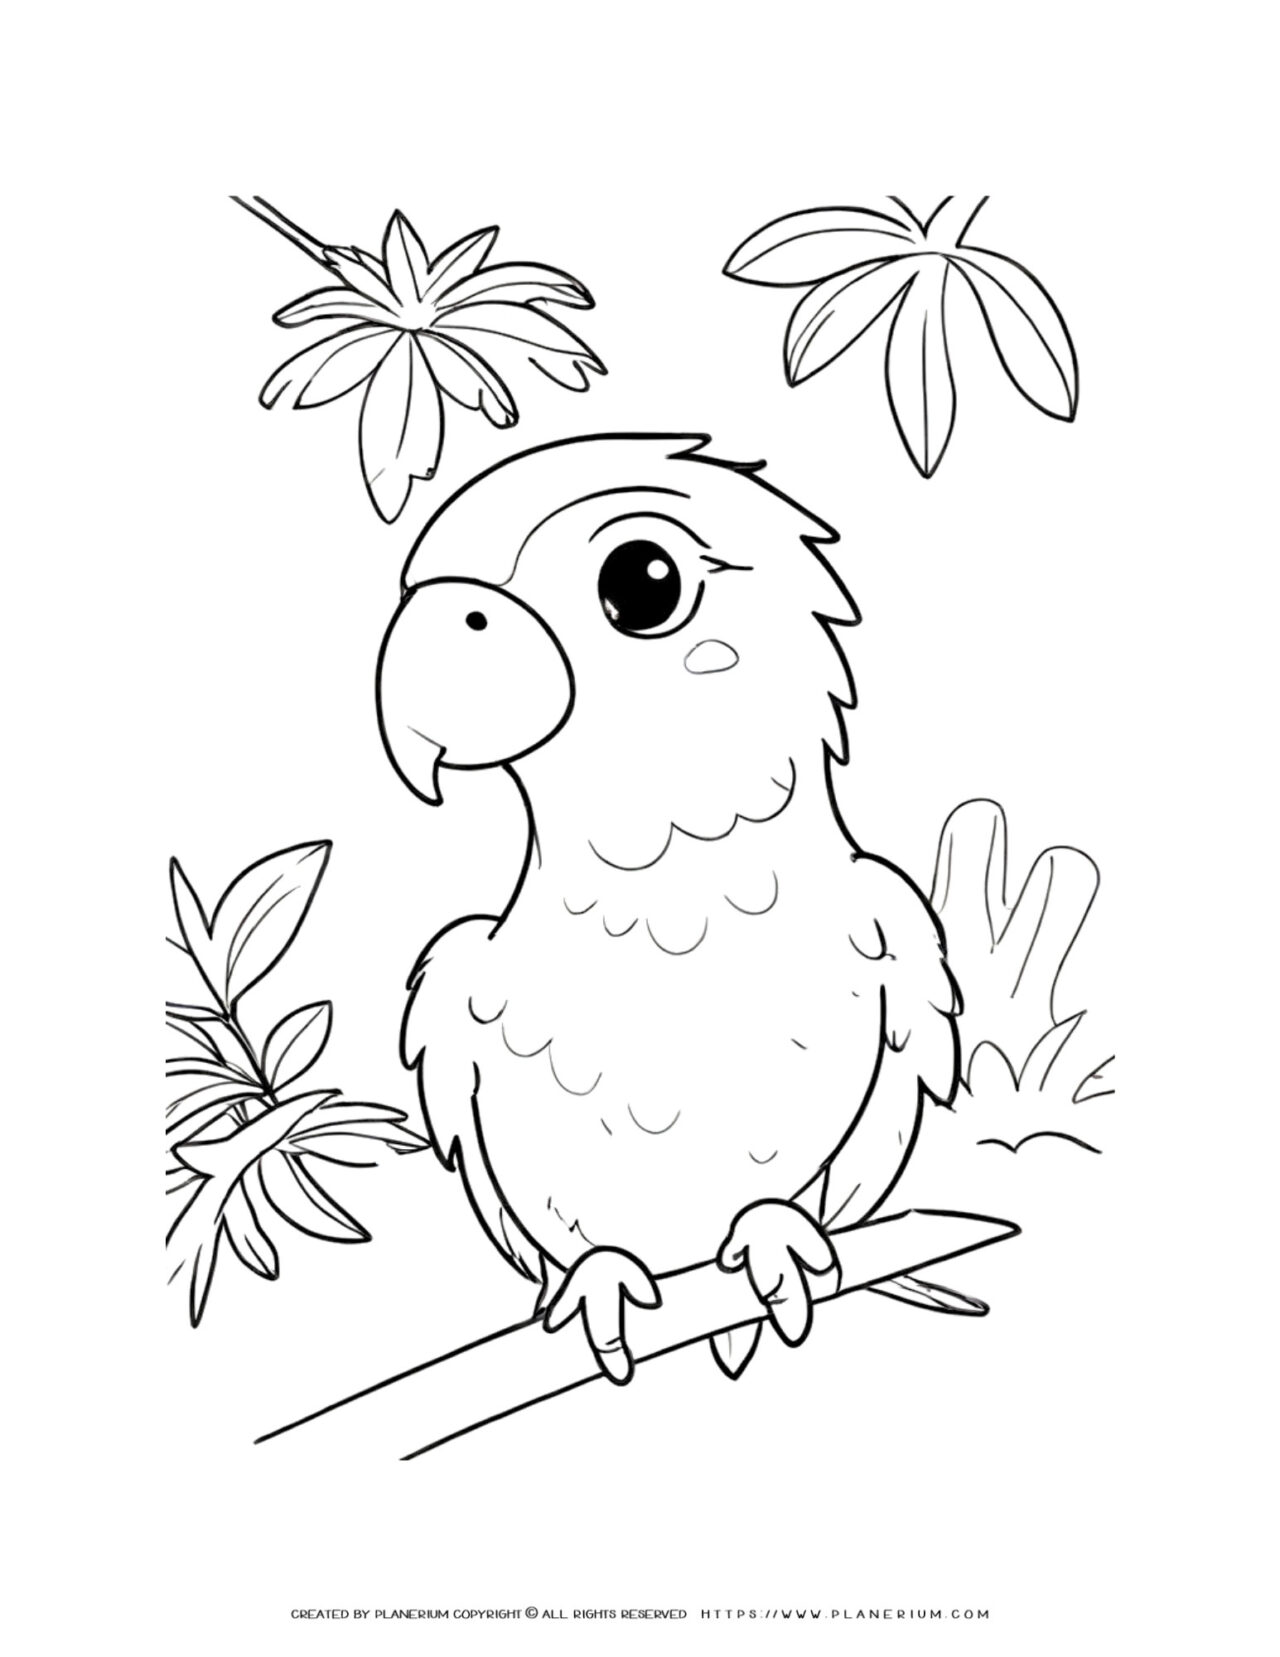 Vibrant-Parrot-Awaits-Color-on-a-Leafy-Branch